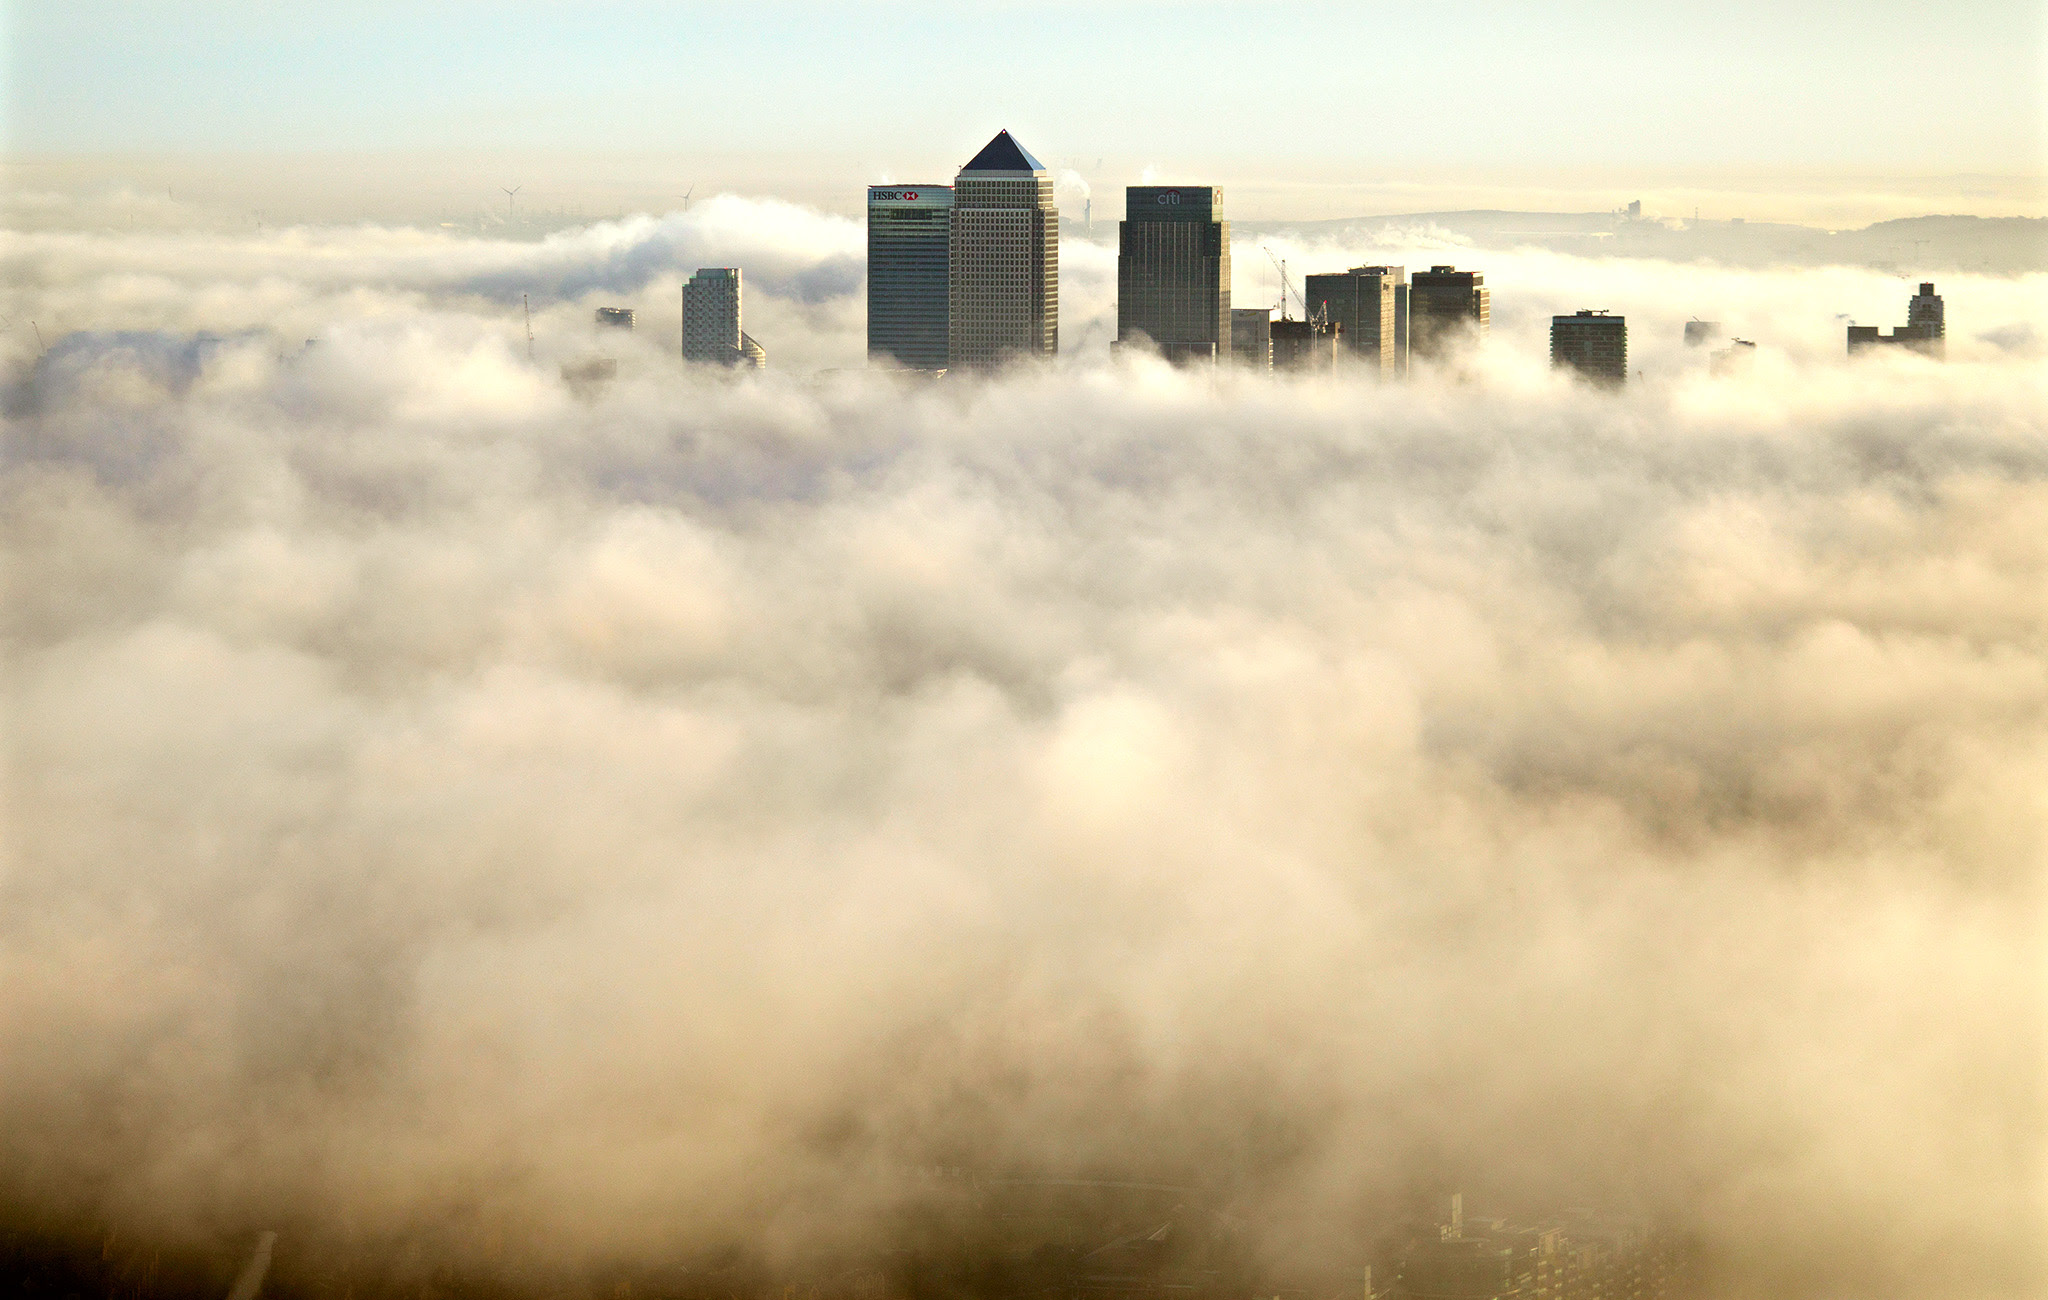 Canary Wharf and the fog around London as seen from the Shard